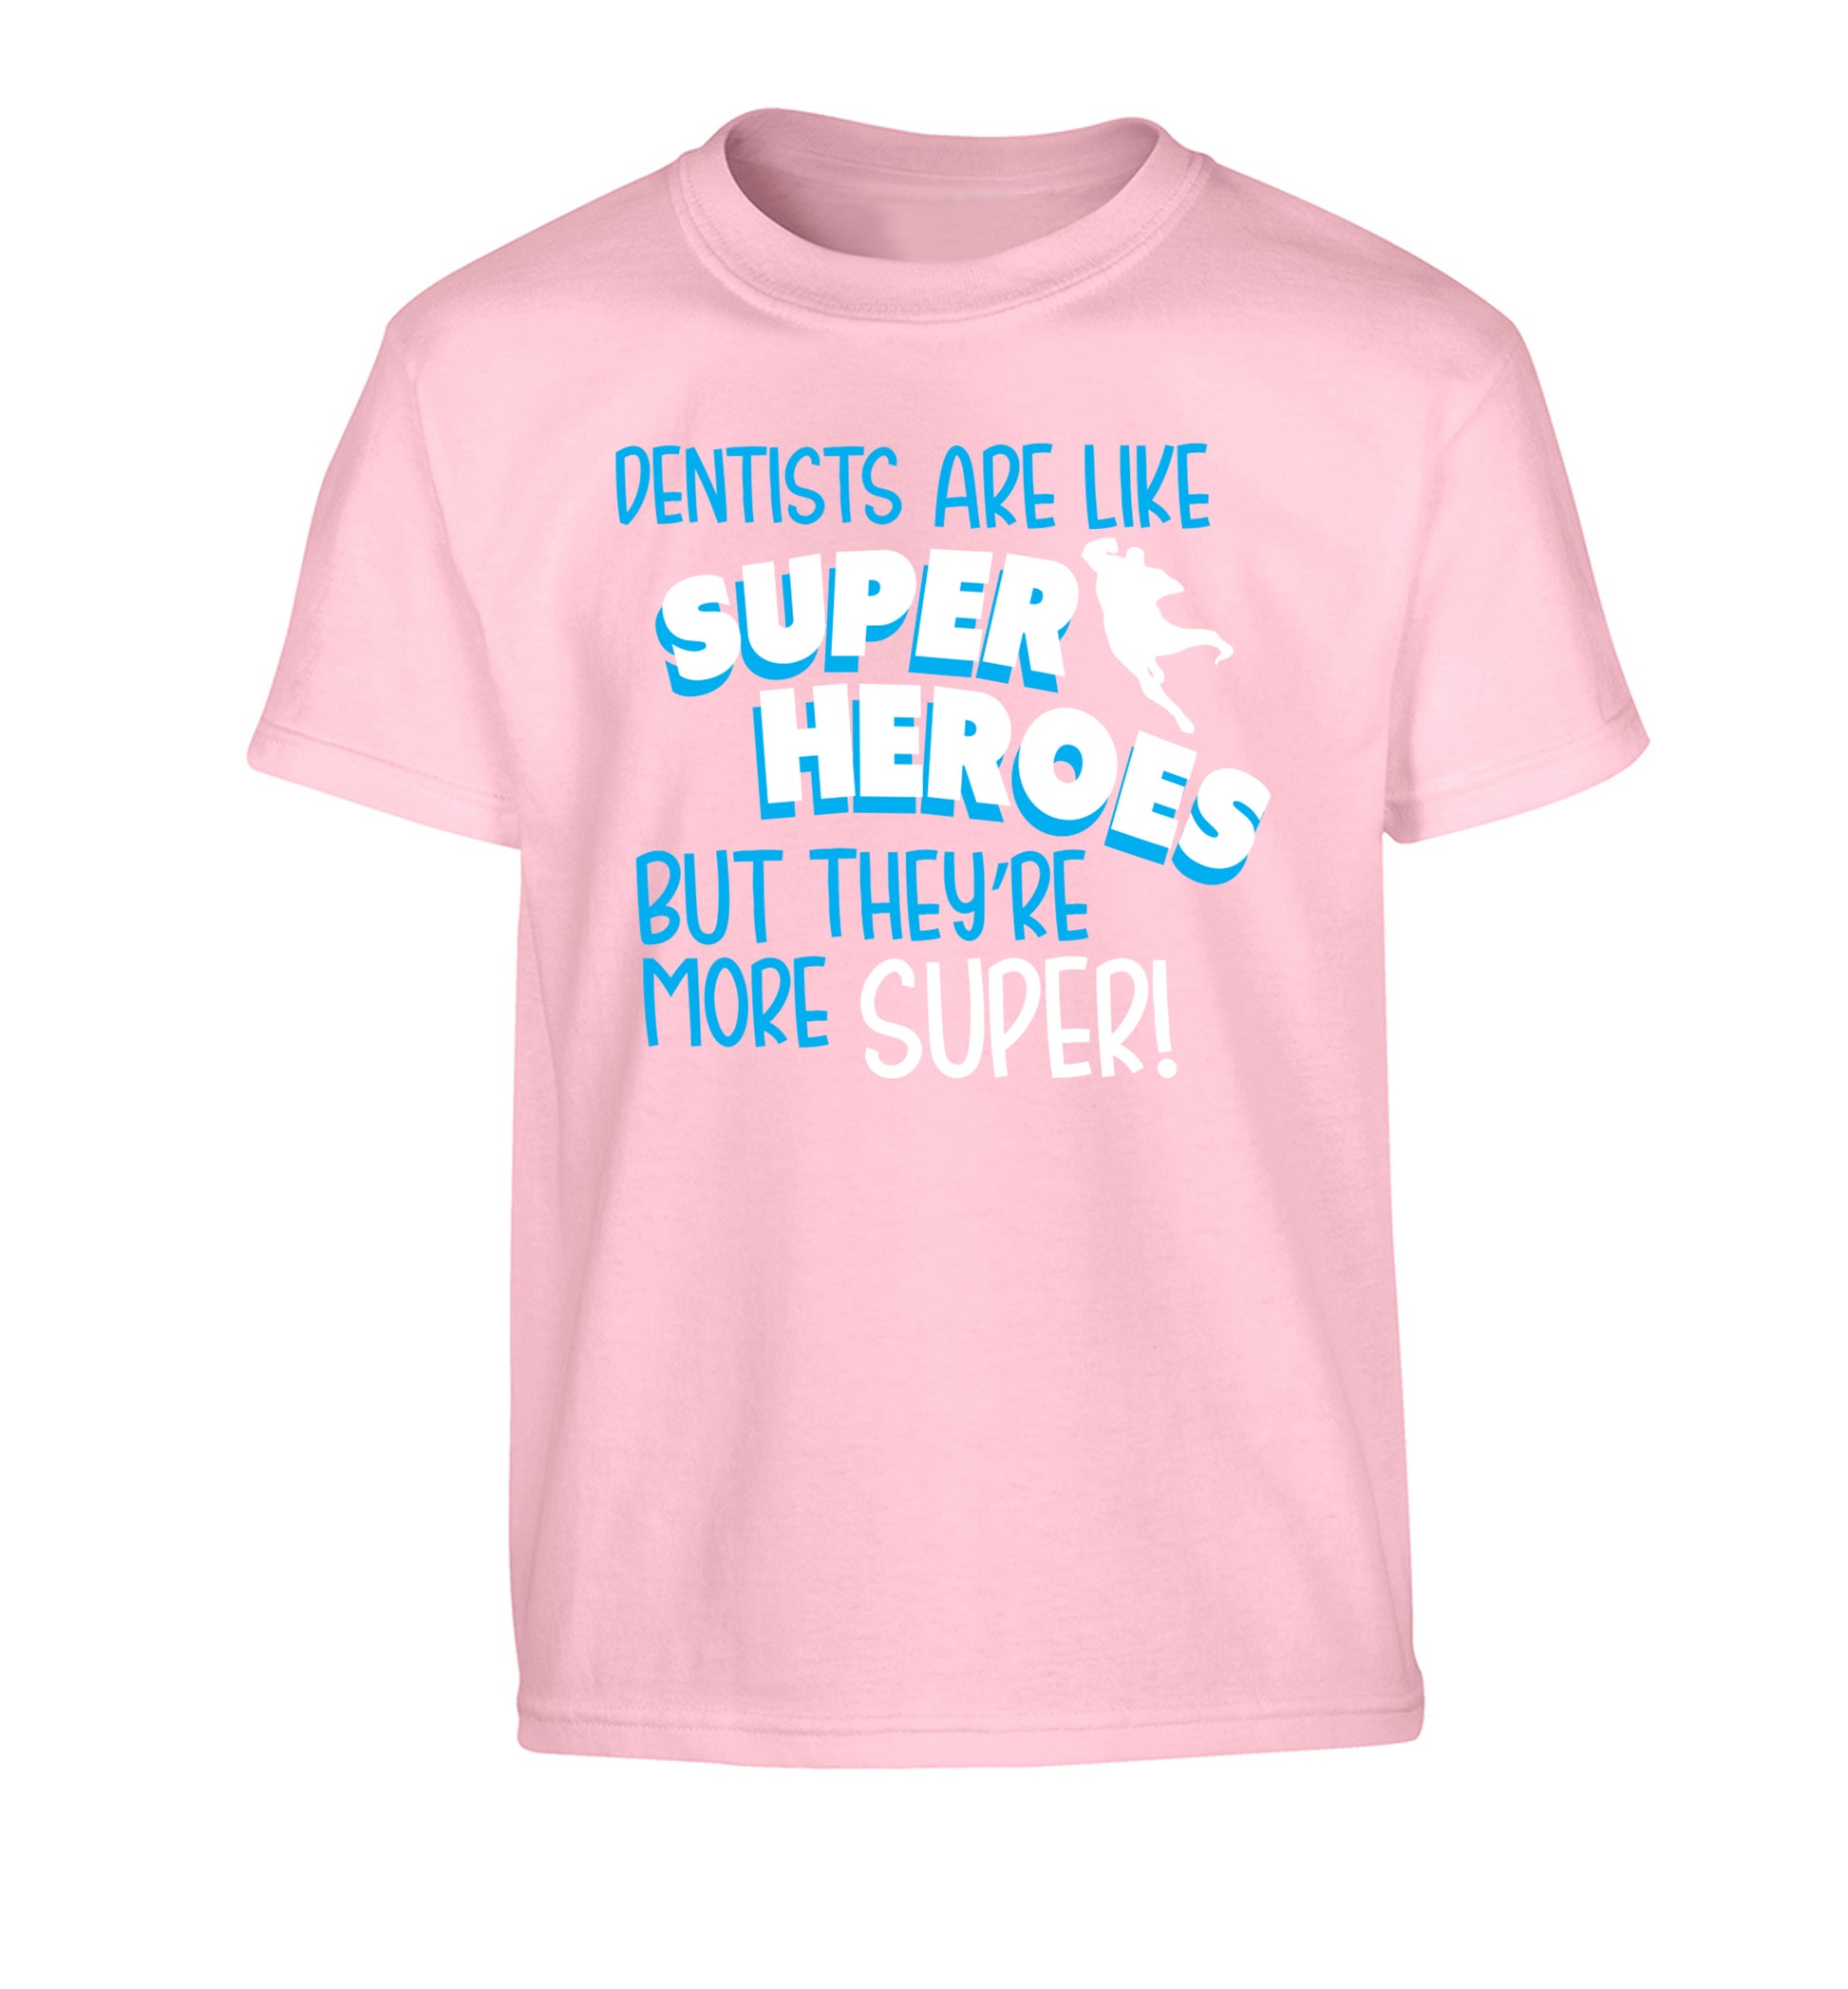 Dentists are like superheros but they're more super Children's light pink Tshirt 12-13 Years